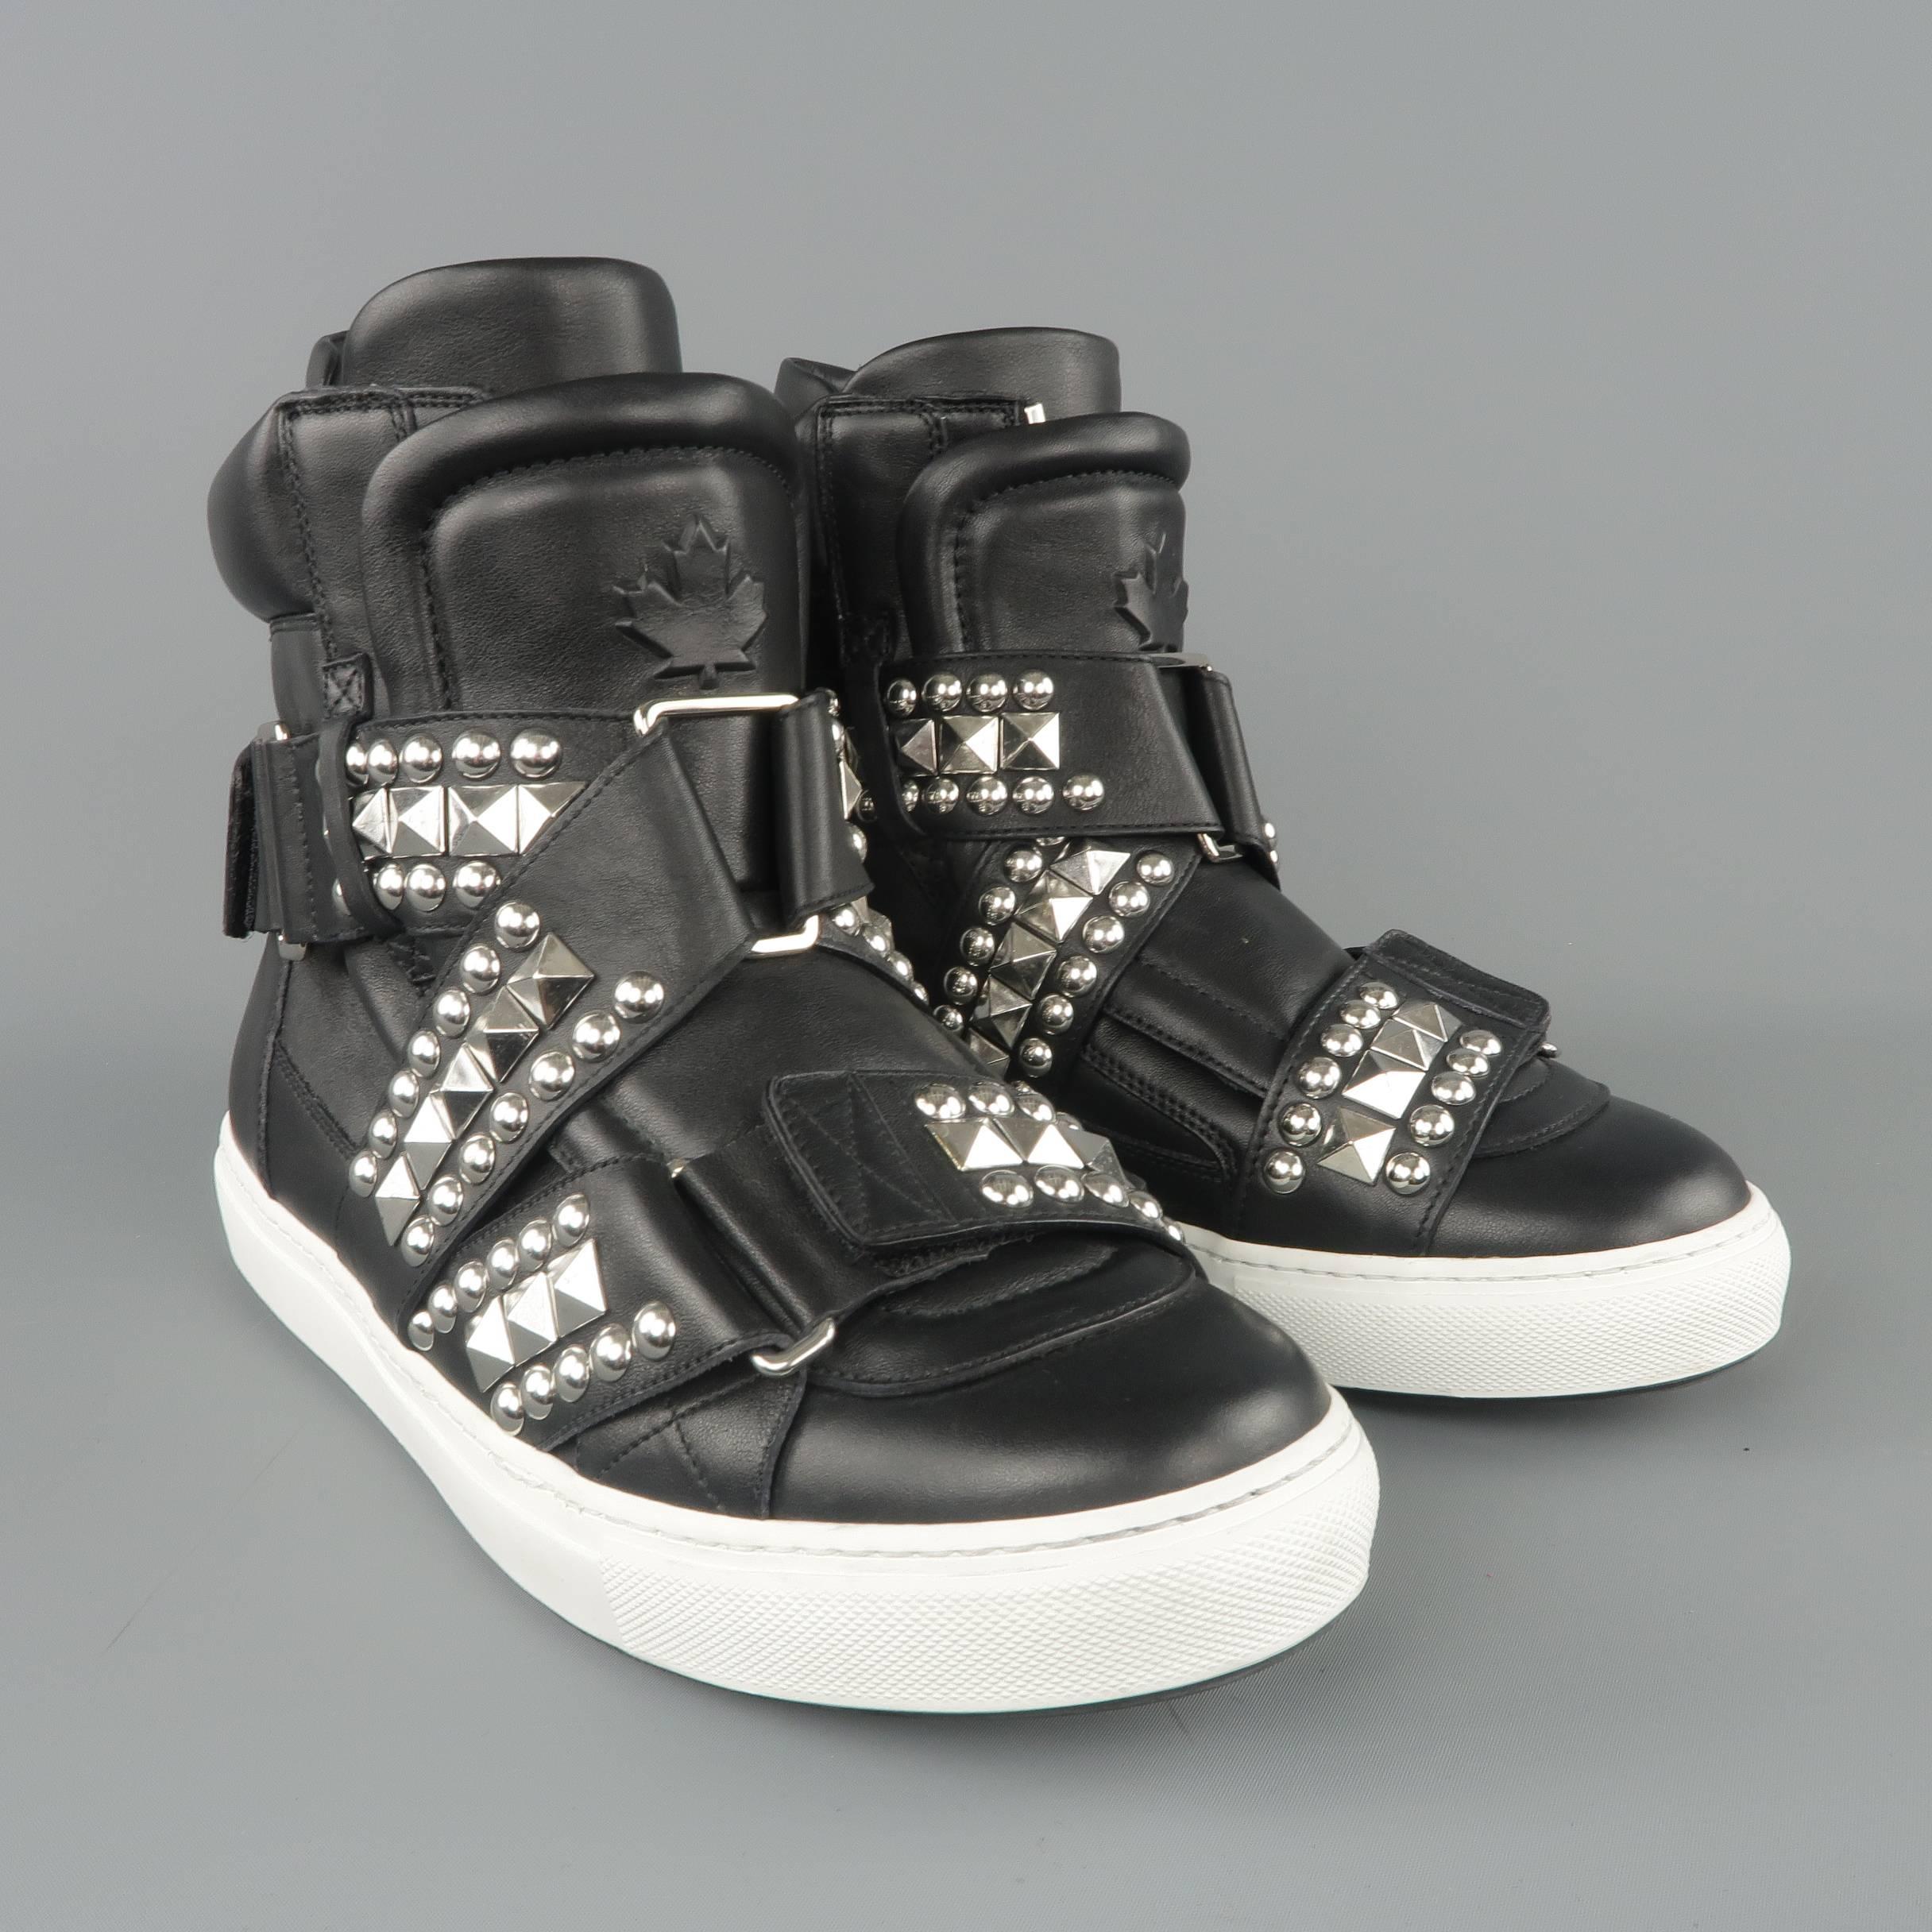 Men's DSQUARED2 Sneakers -  9.5 Black Silver Studded Leather High Top